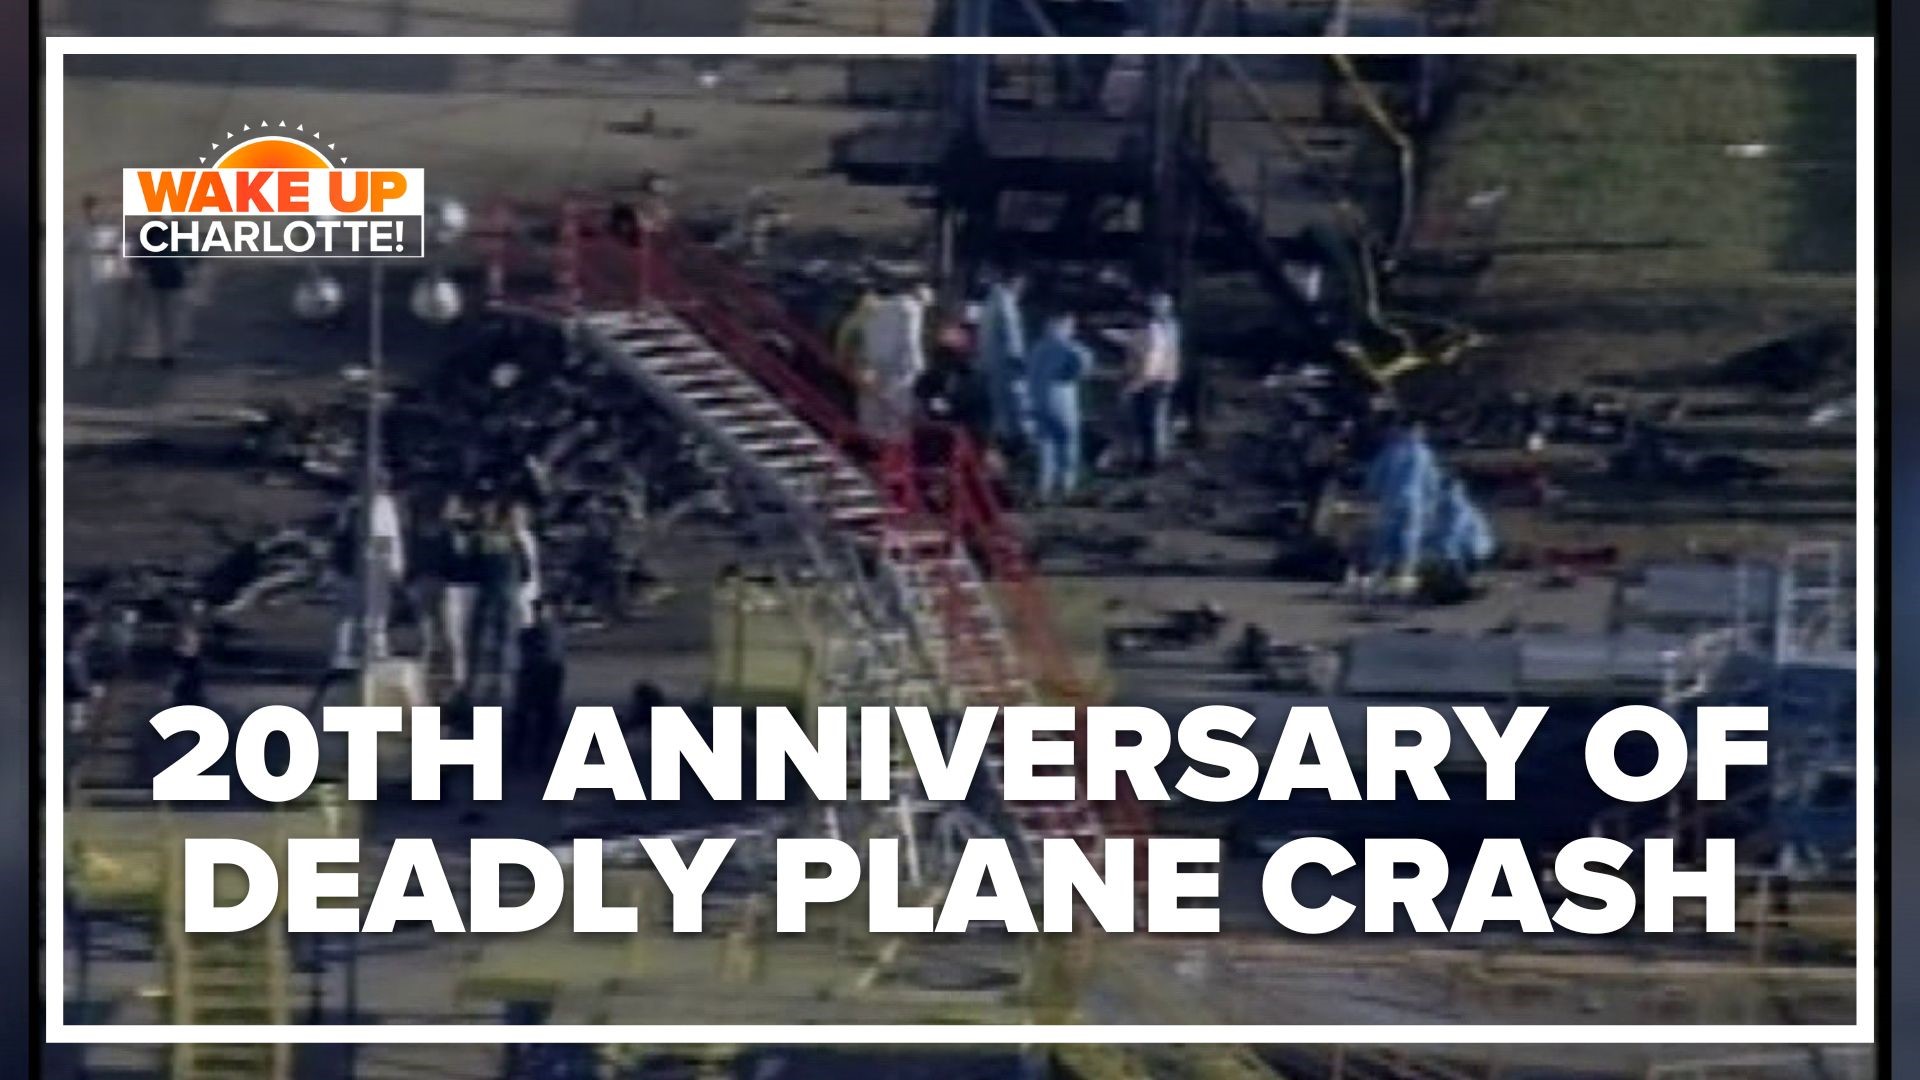 This week marks the 20th anniversary of Air Midwest flight 5481. The small commuter plan crashed shortly after takeoff, paving the way for safety changes.